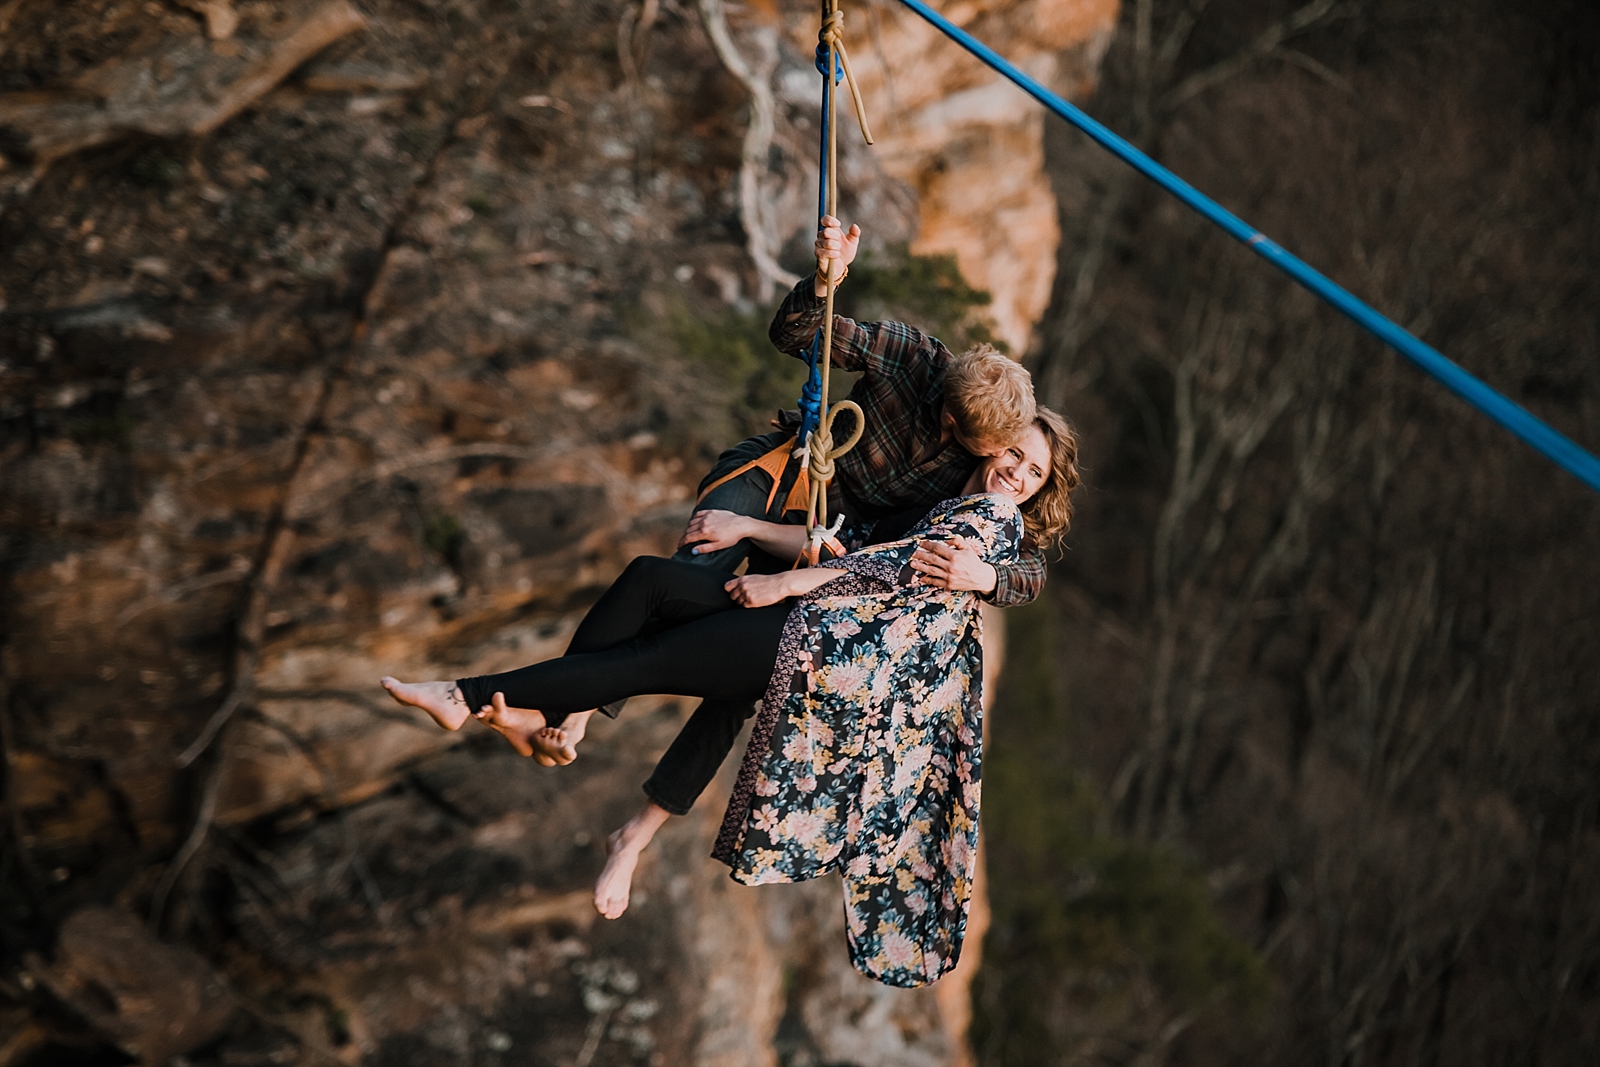 couple highlining, adventurous engagements, highlining, slacklining, linville gorge wilderness, signal point engagements, chattanooga elopement, chattanooga highline, chattanooga highlining